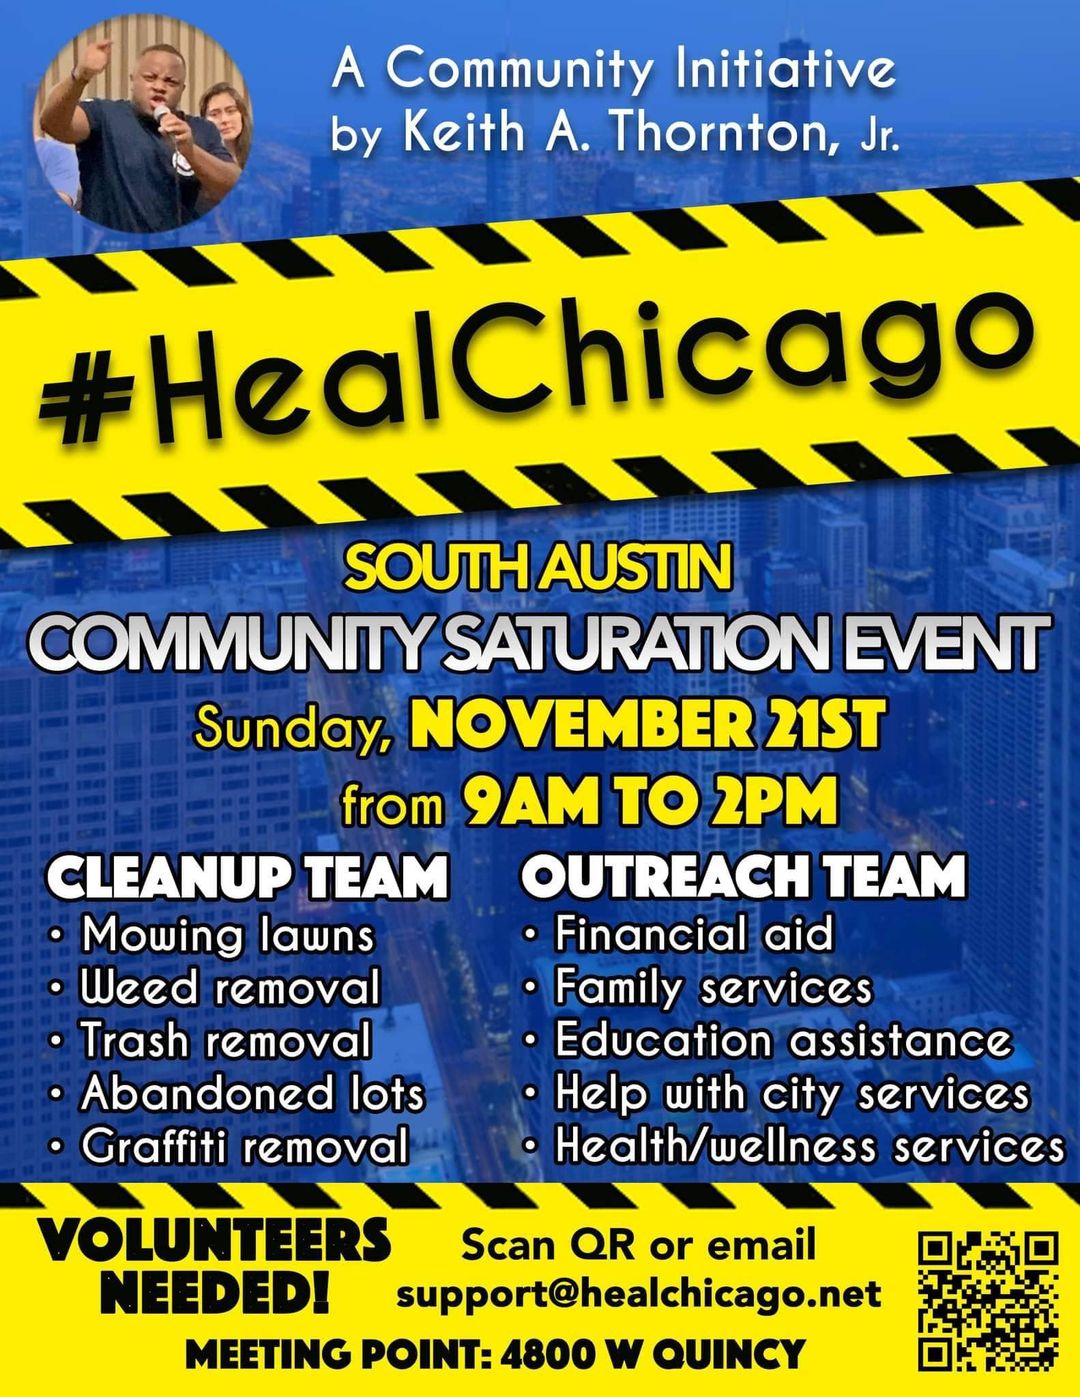 Heal Chicago - South Austin Commnity Saturation Event